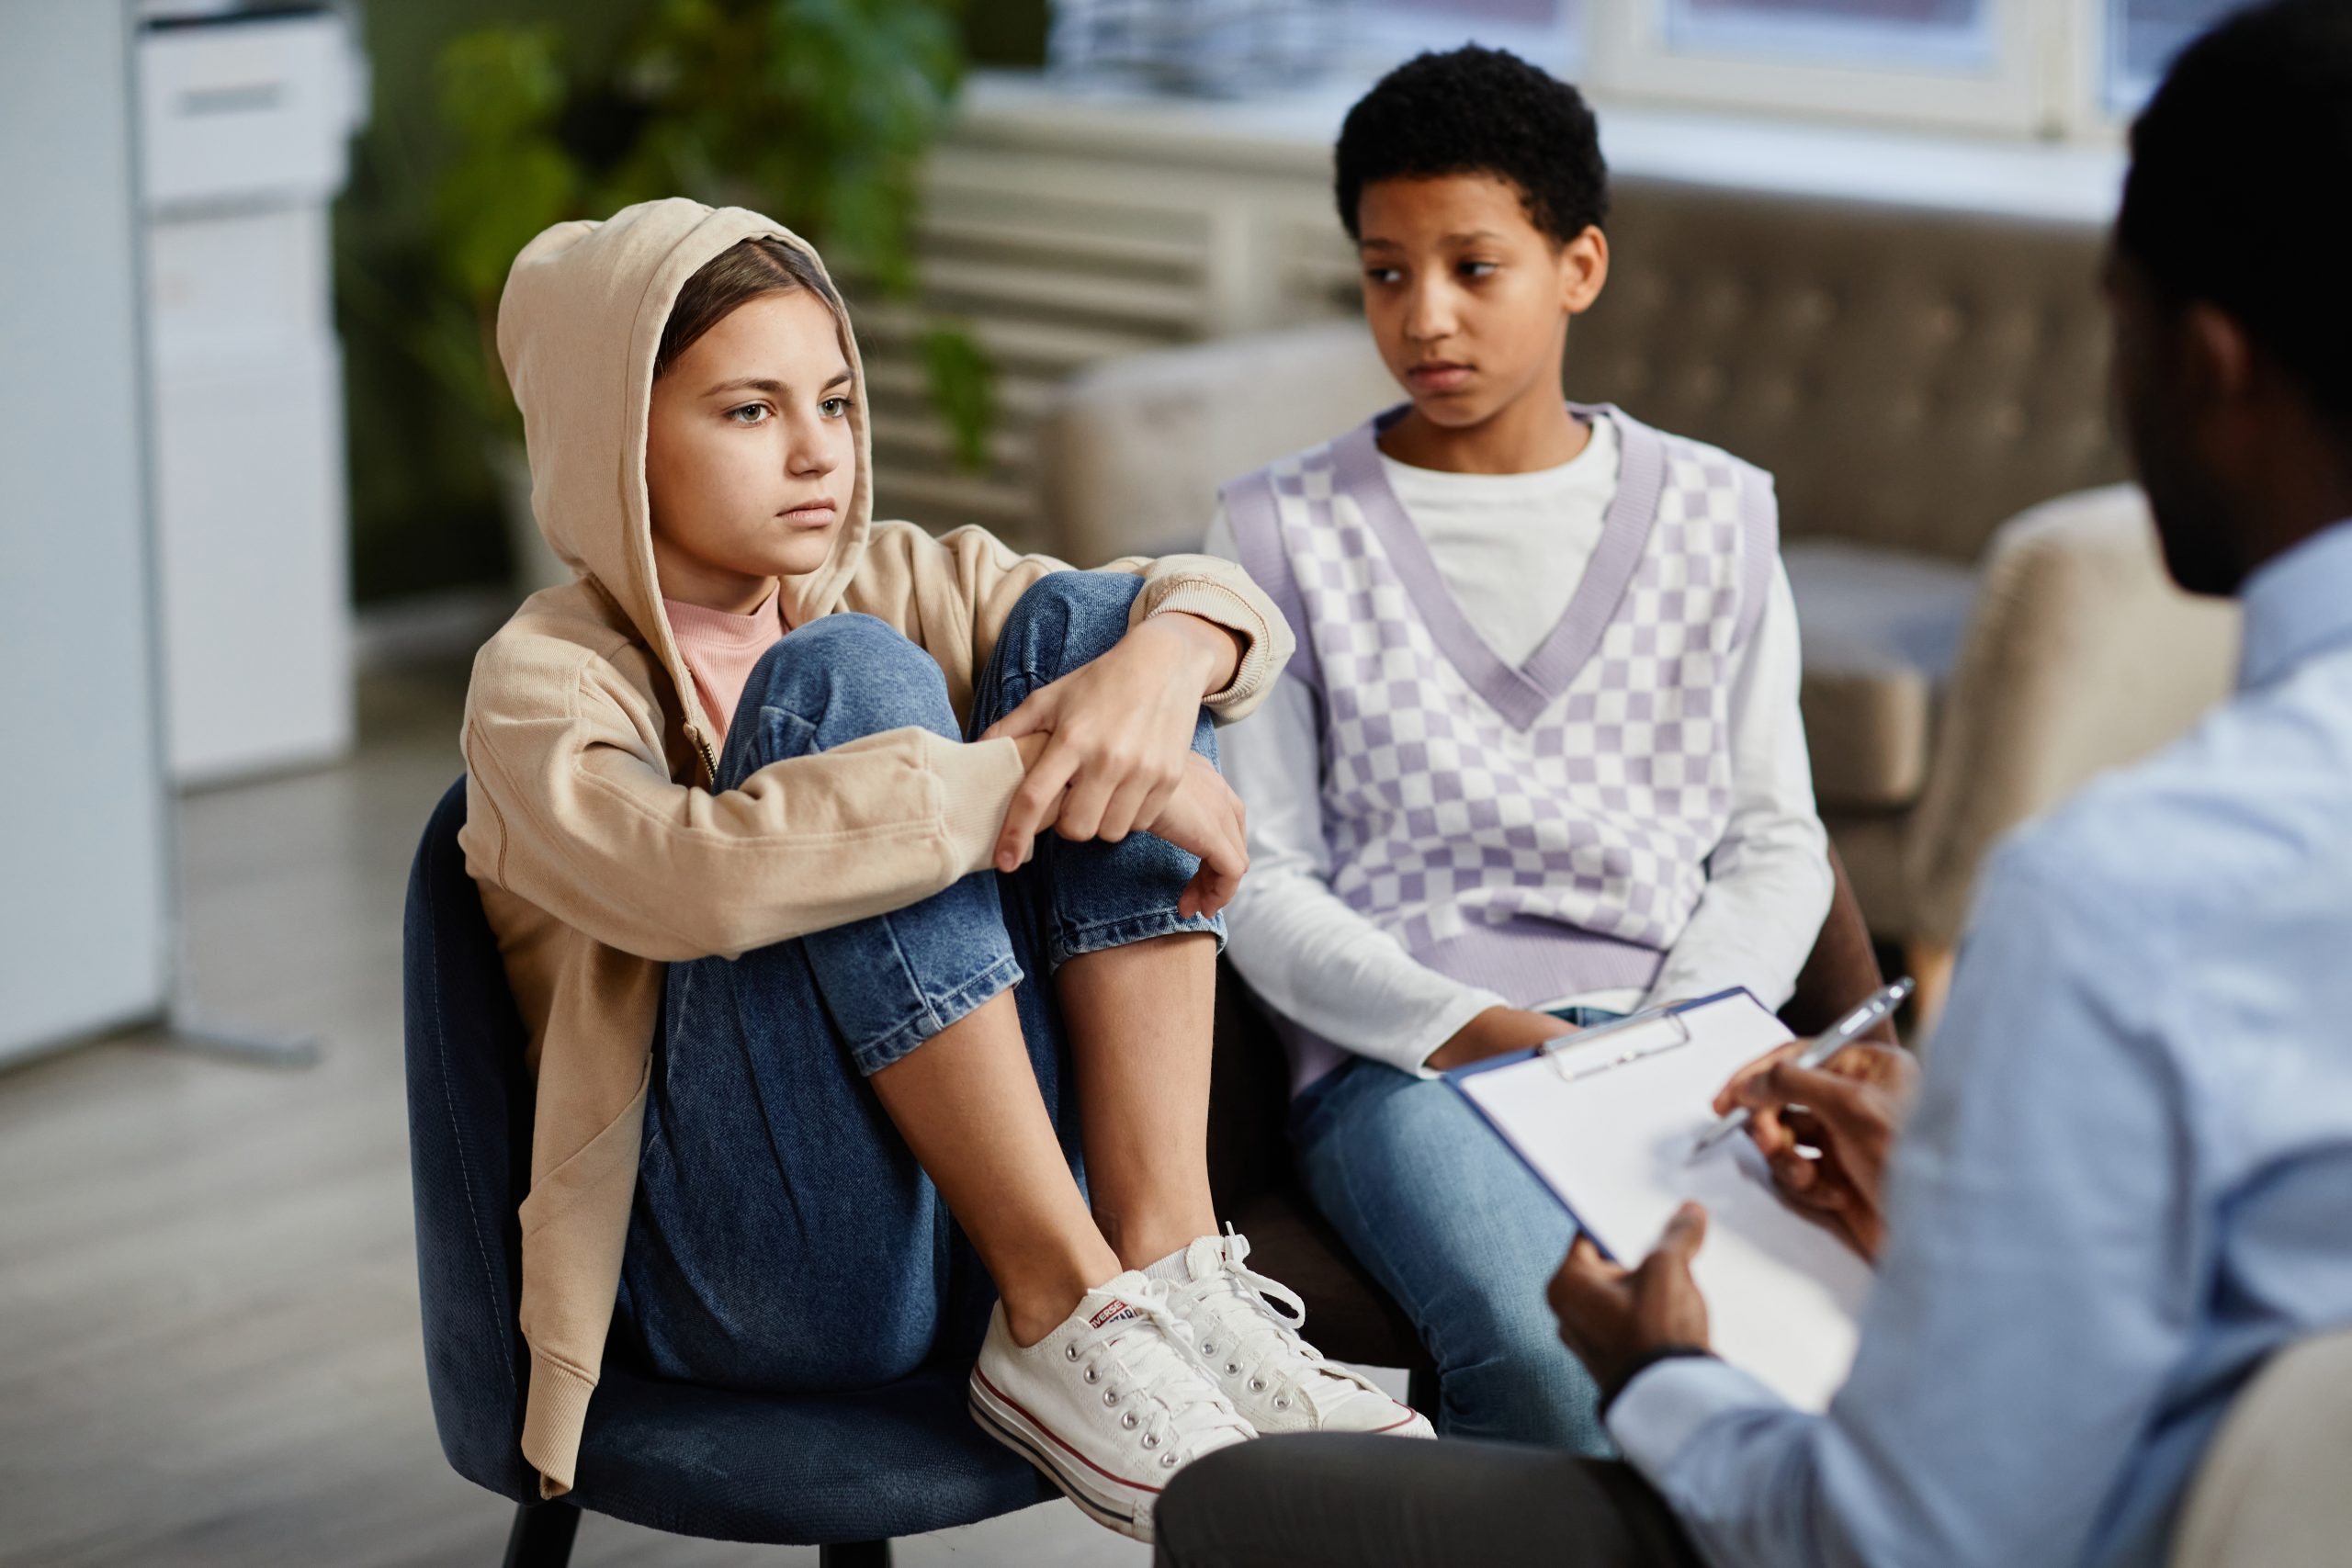 Treatment For Suicidal Ideation in Children